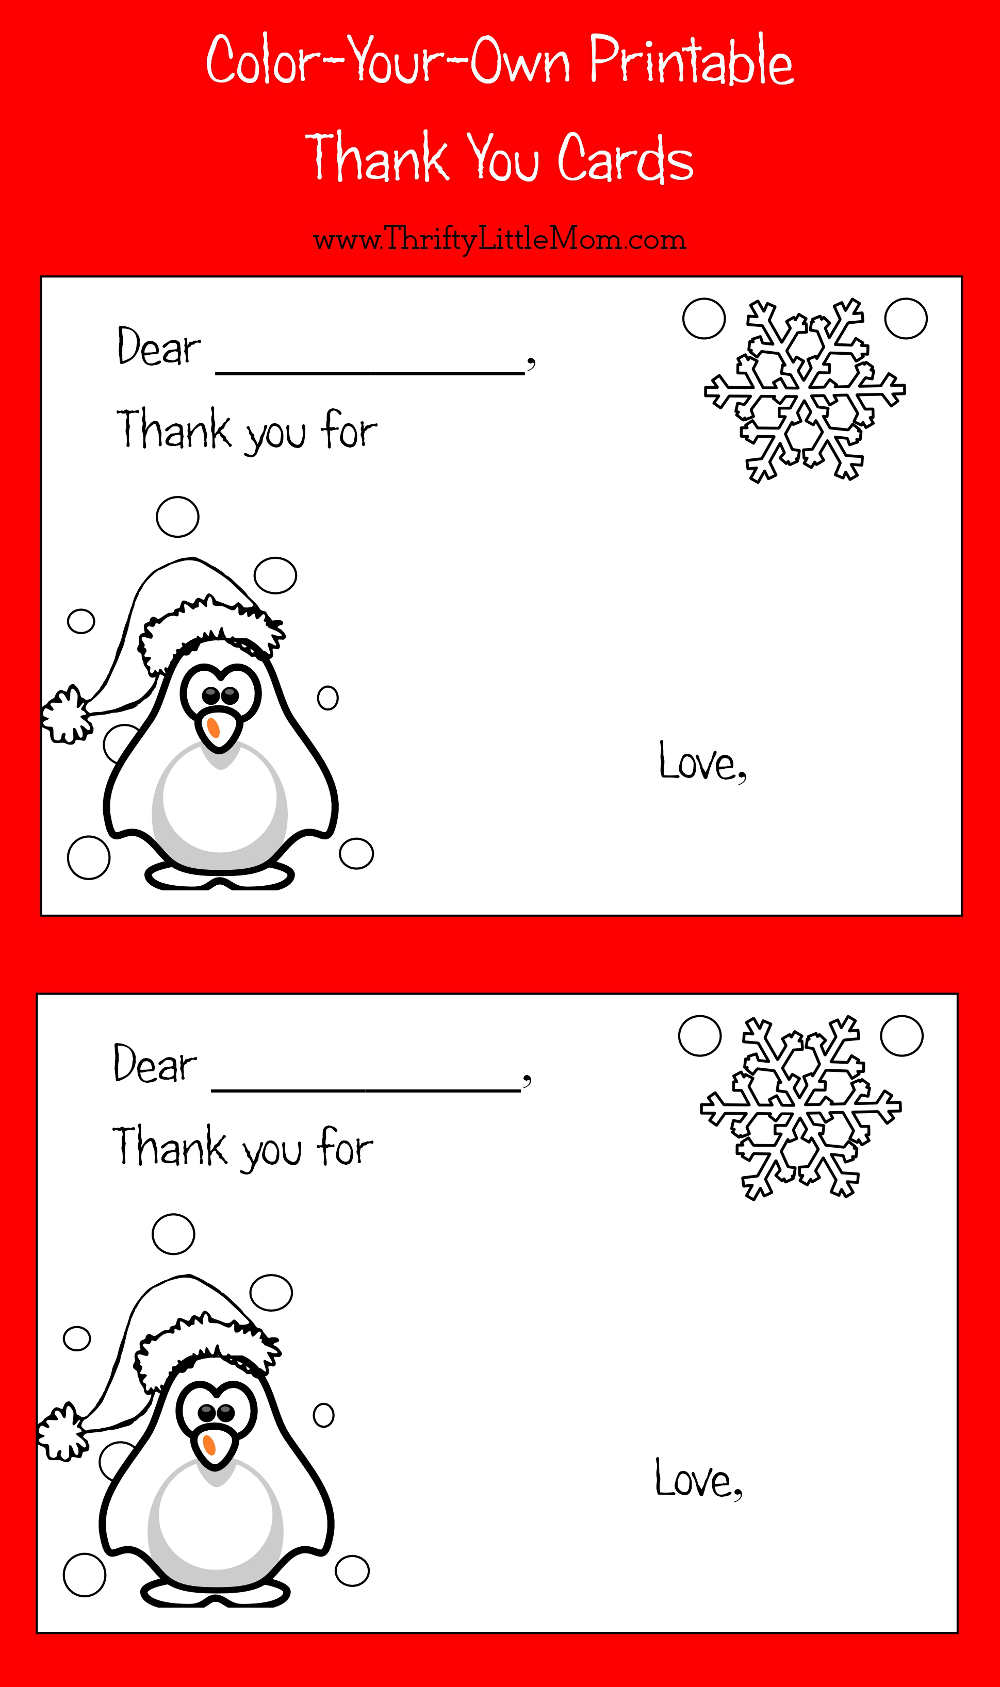 color-your-own-printable-thank-you-cards-for-kids